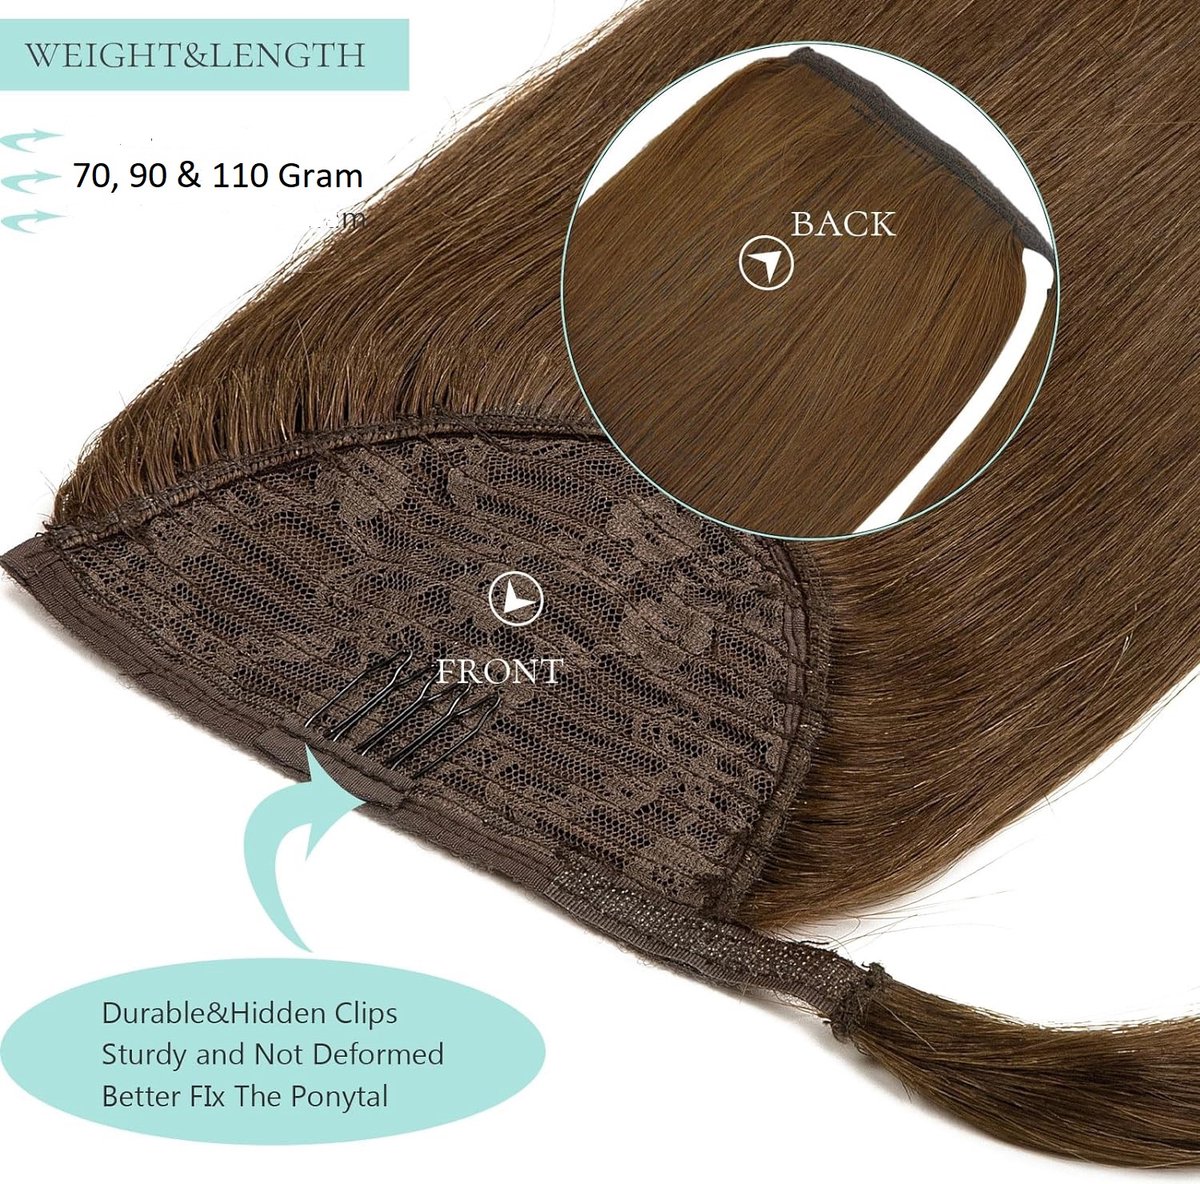 Vivendi Ponytail Clip In Hairextensions| Human Hair Echt Haar | Wrap Around Hairextensions | 16